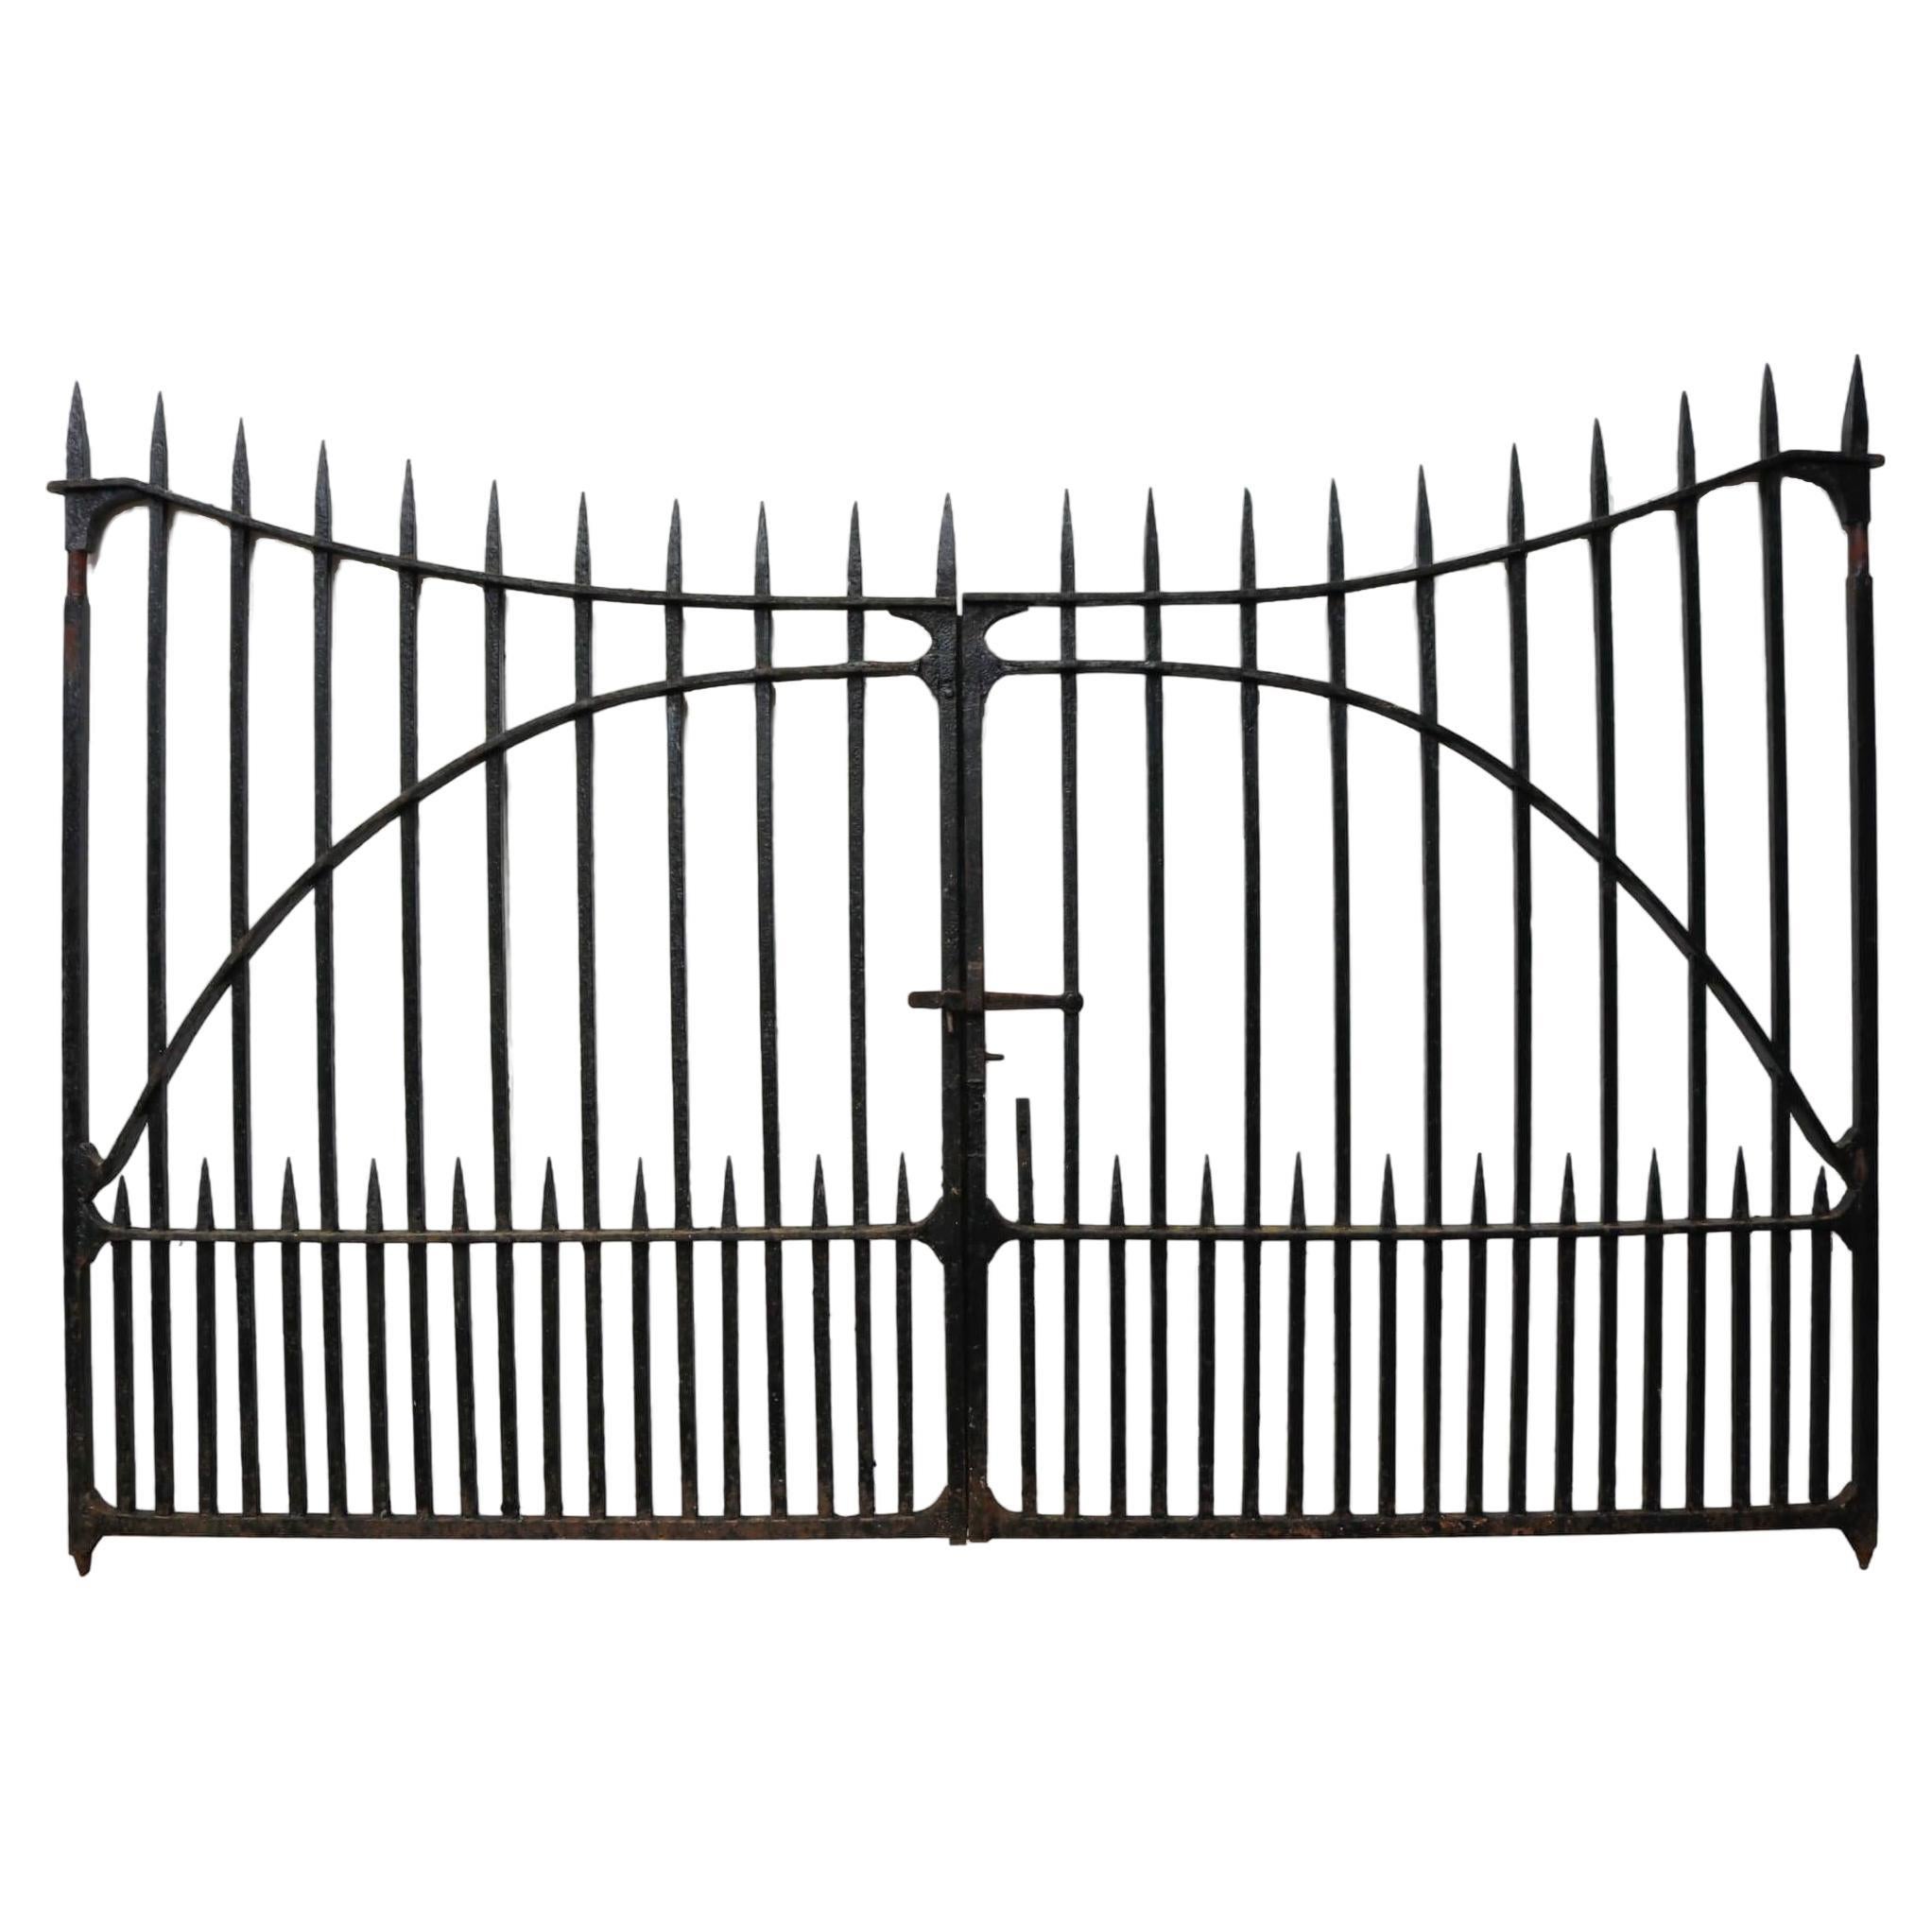 Heavy Duty Wrought Iron Driveway Gates 297 cm (9’7”) For Sale